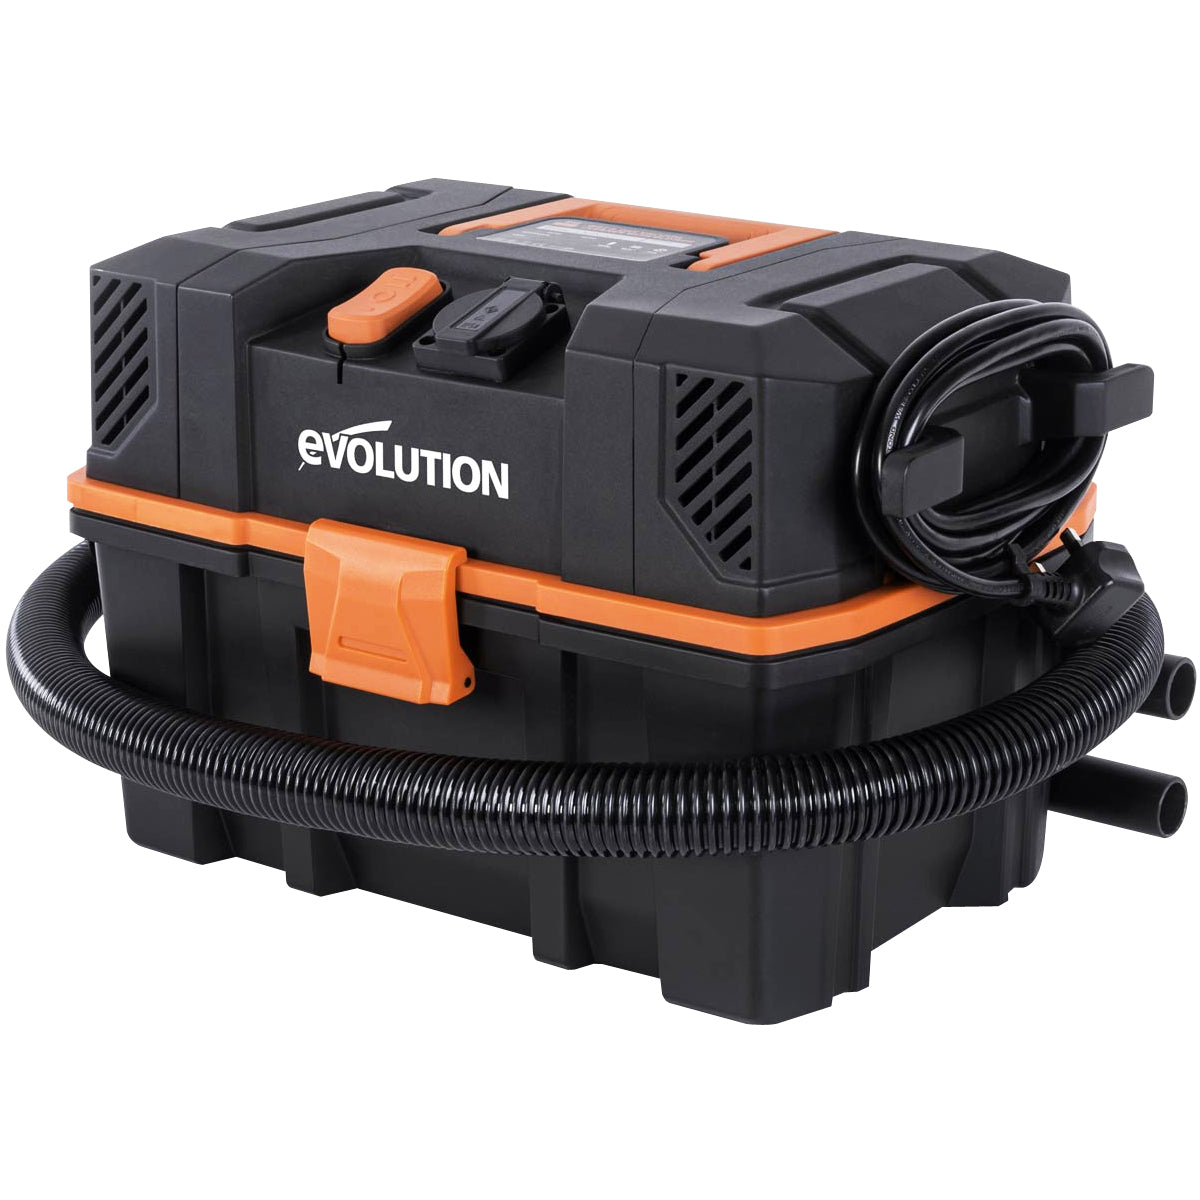 Evolution R15VAC Wet & Dry Workshop Vacuum Cleaner Dust Extractor With Power Take-off 086-0001